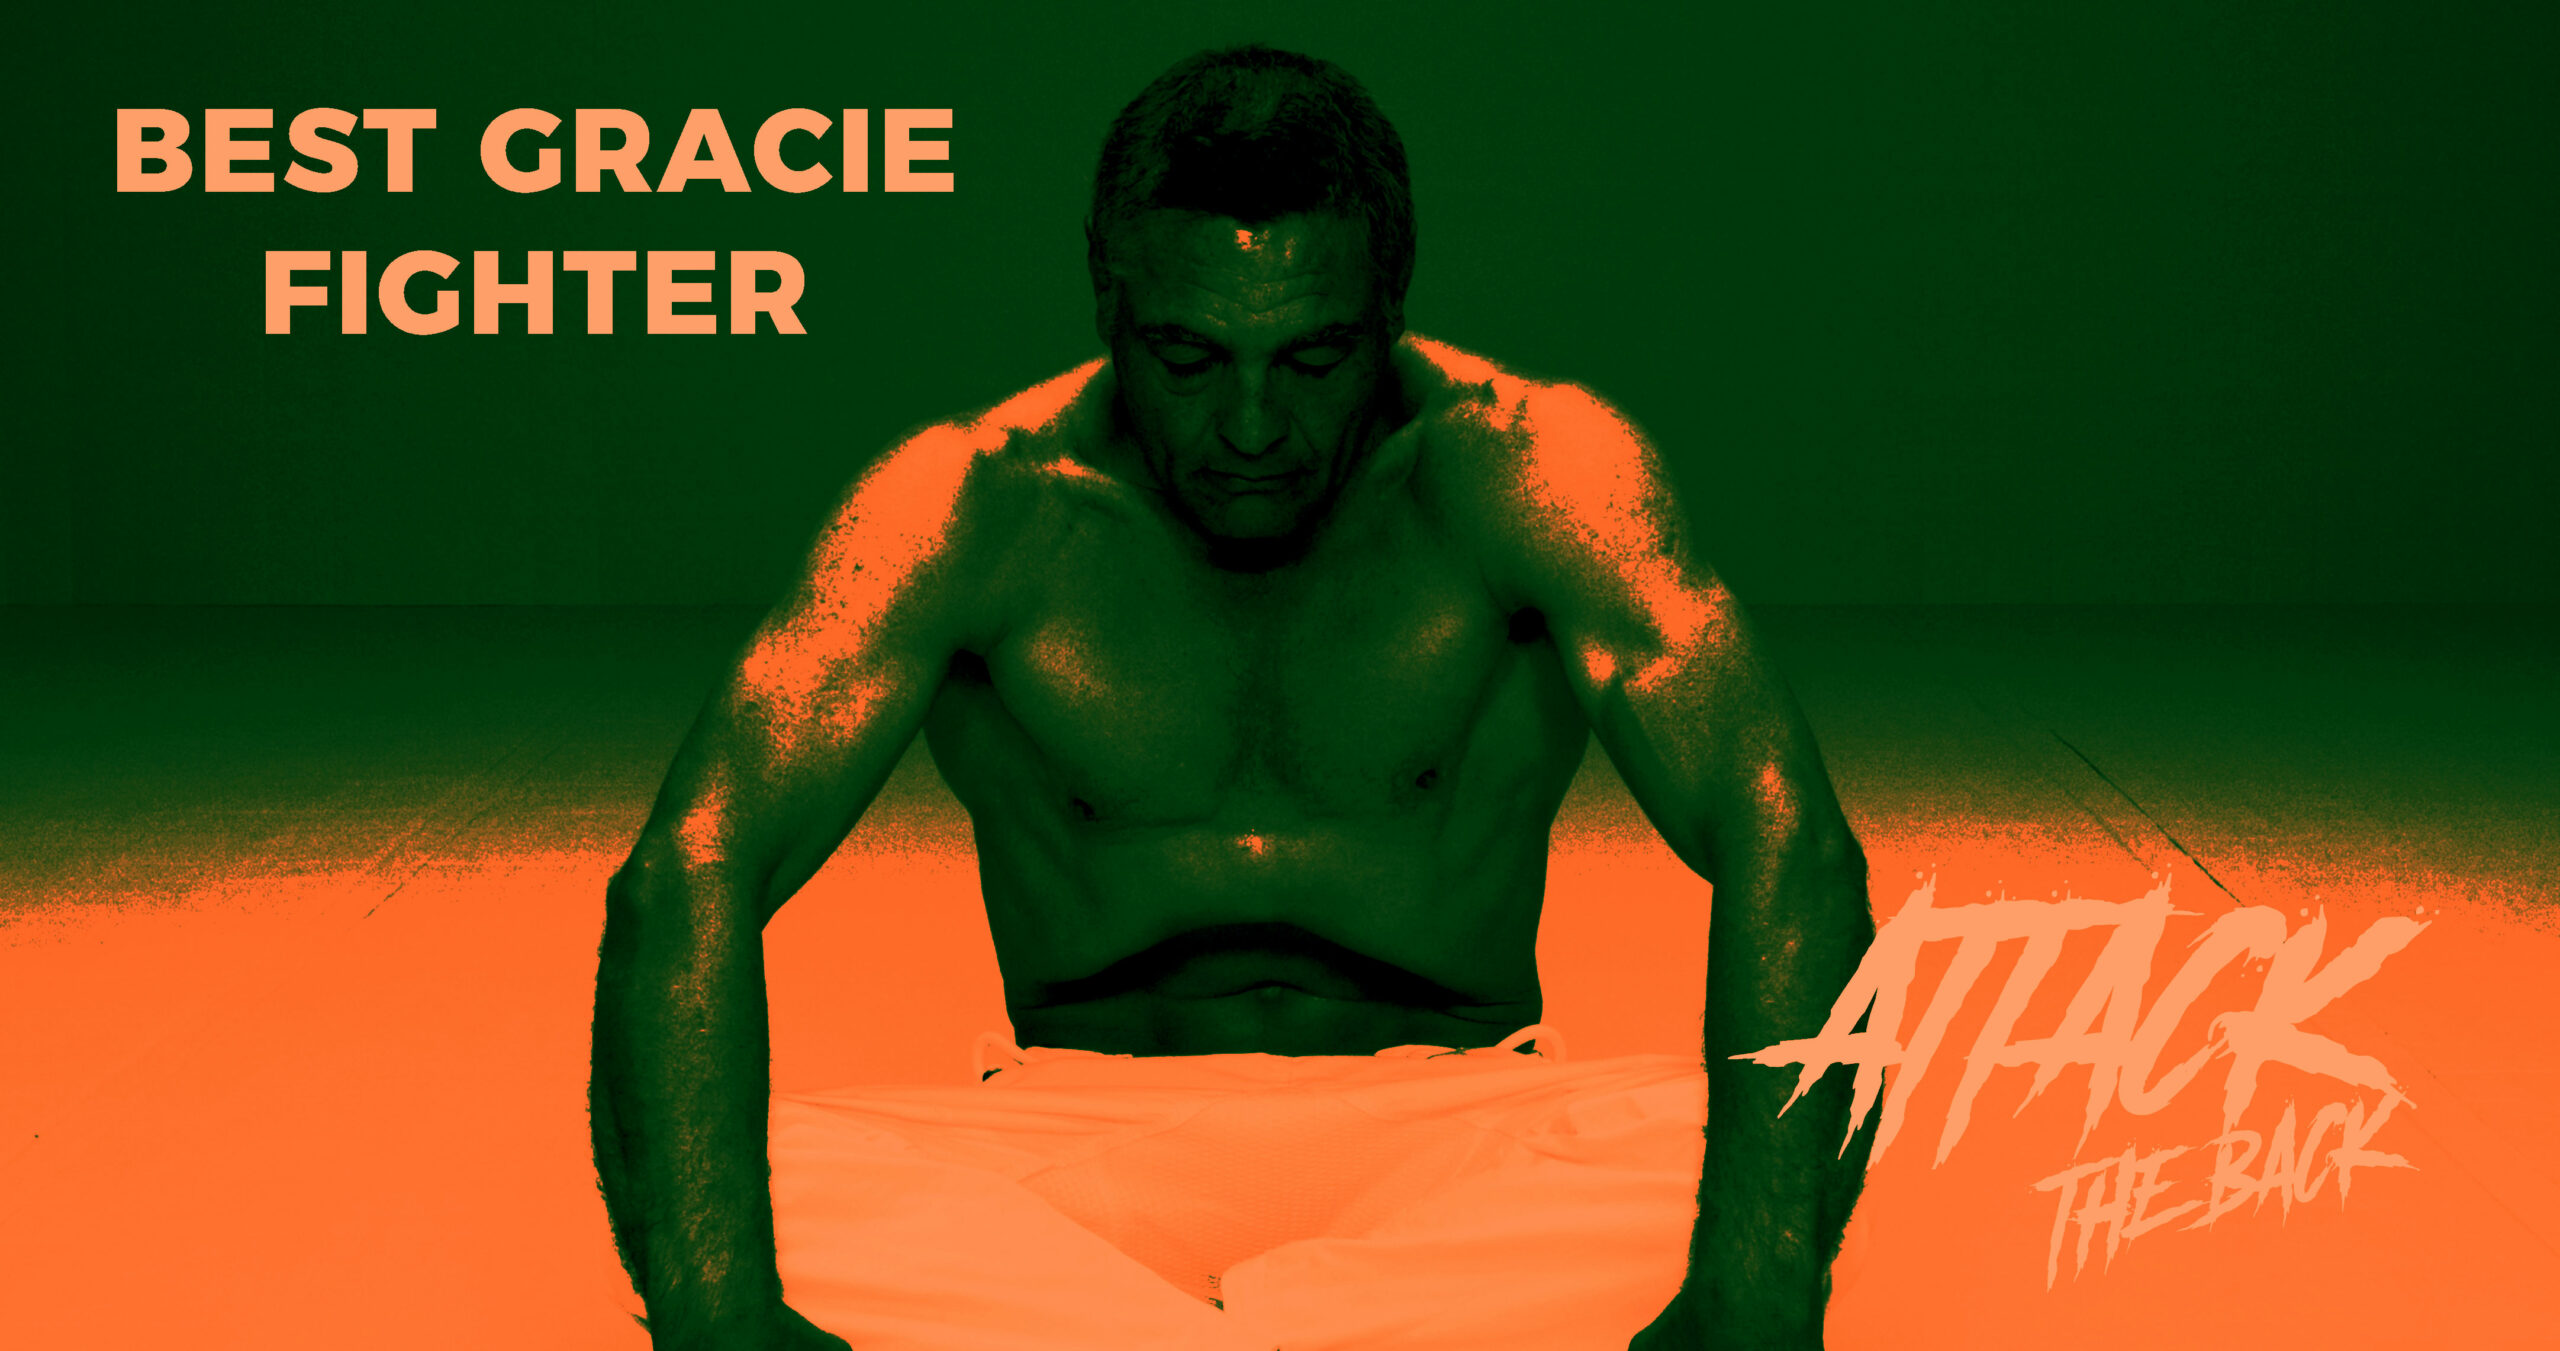 Best Gracie Fighter: Top 5 Gracie Family Members Who Dominated the MMA Scene